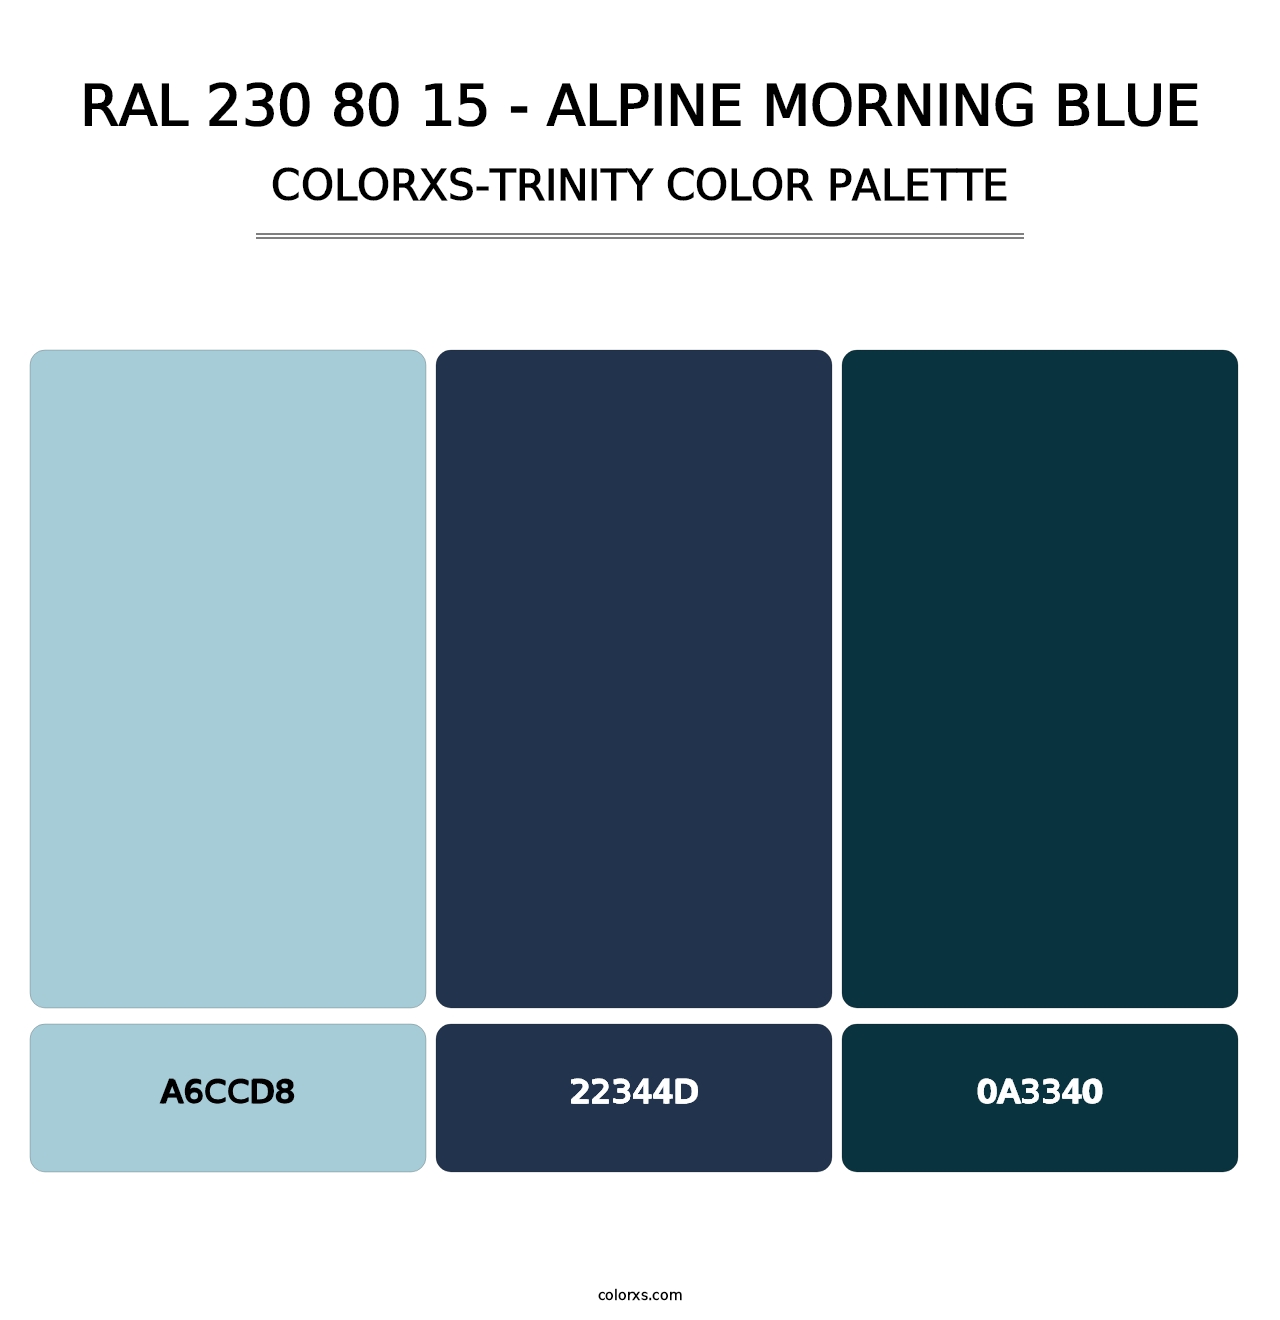 RAL 230 80 15 - Alpine Morning Blue - Colorxs Trinity Palette